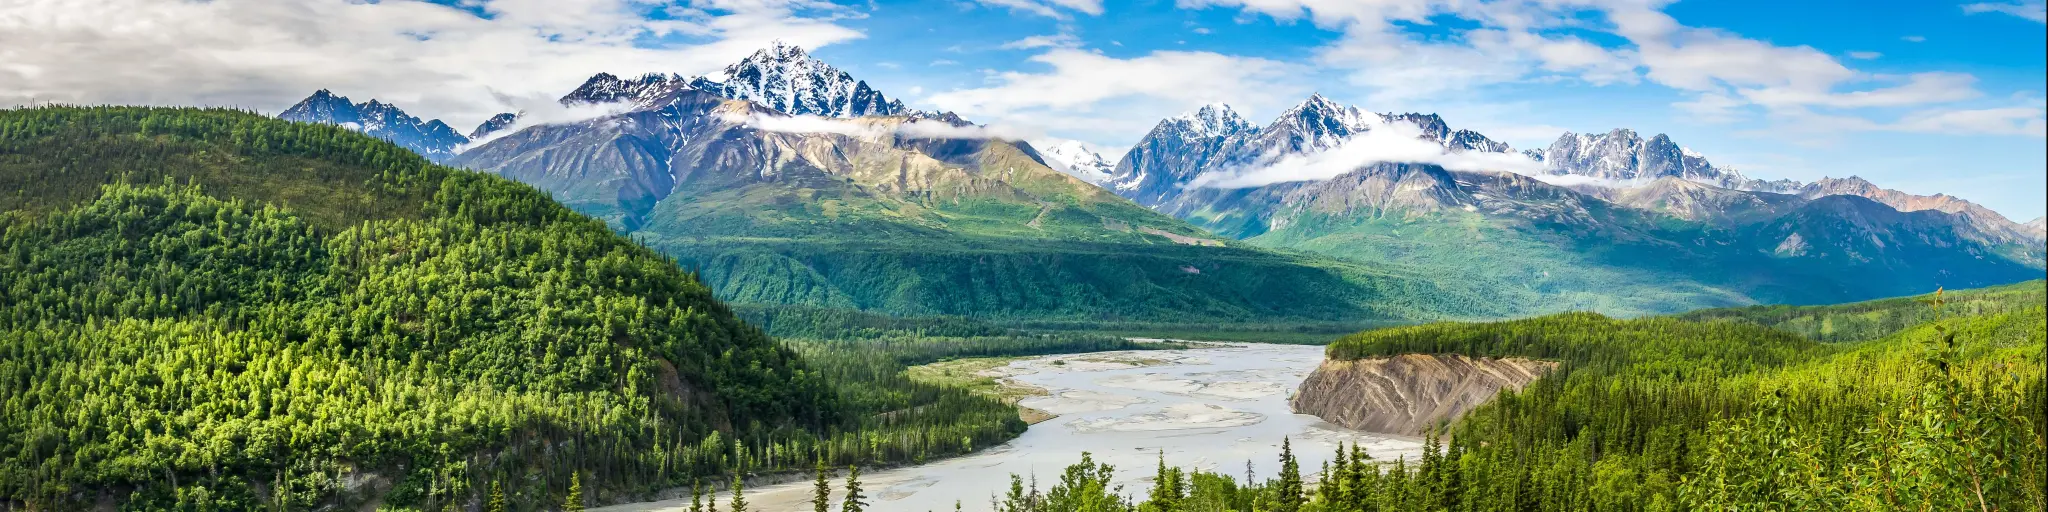 Chugach Alaska Range with a beautiful river cutting across a green forest with mountains as the backdrop